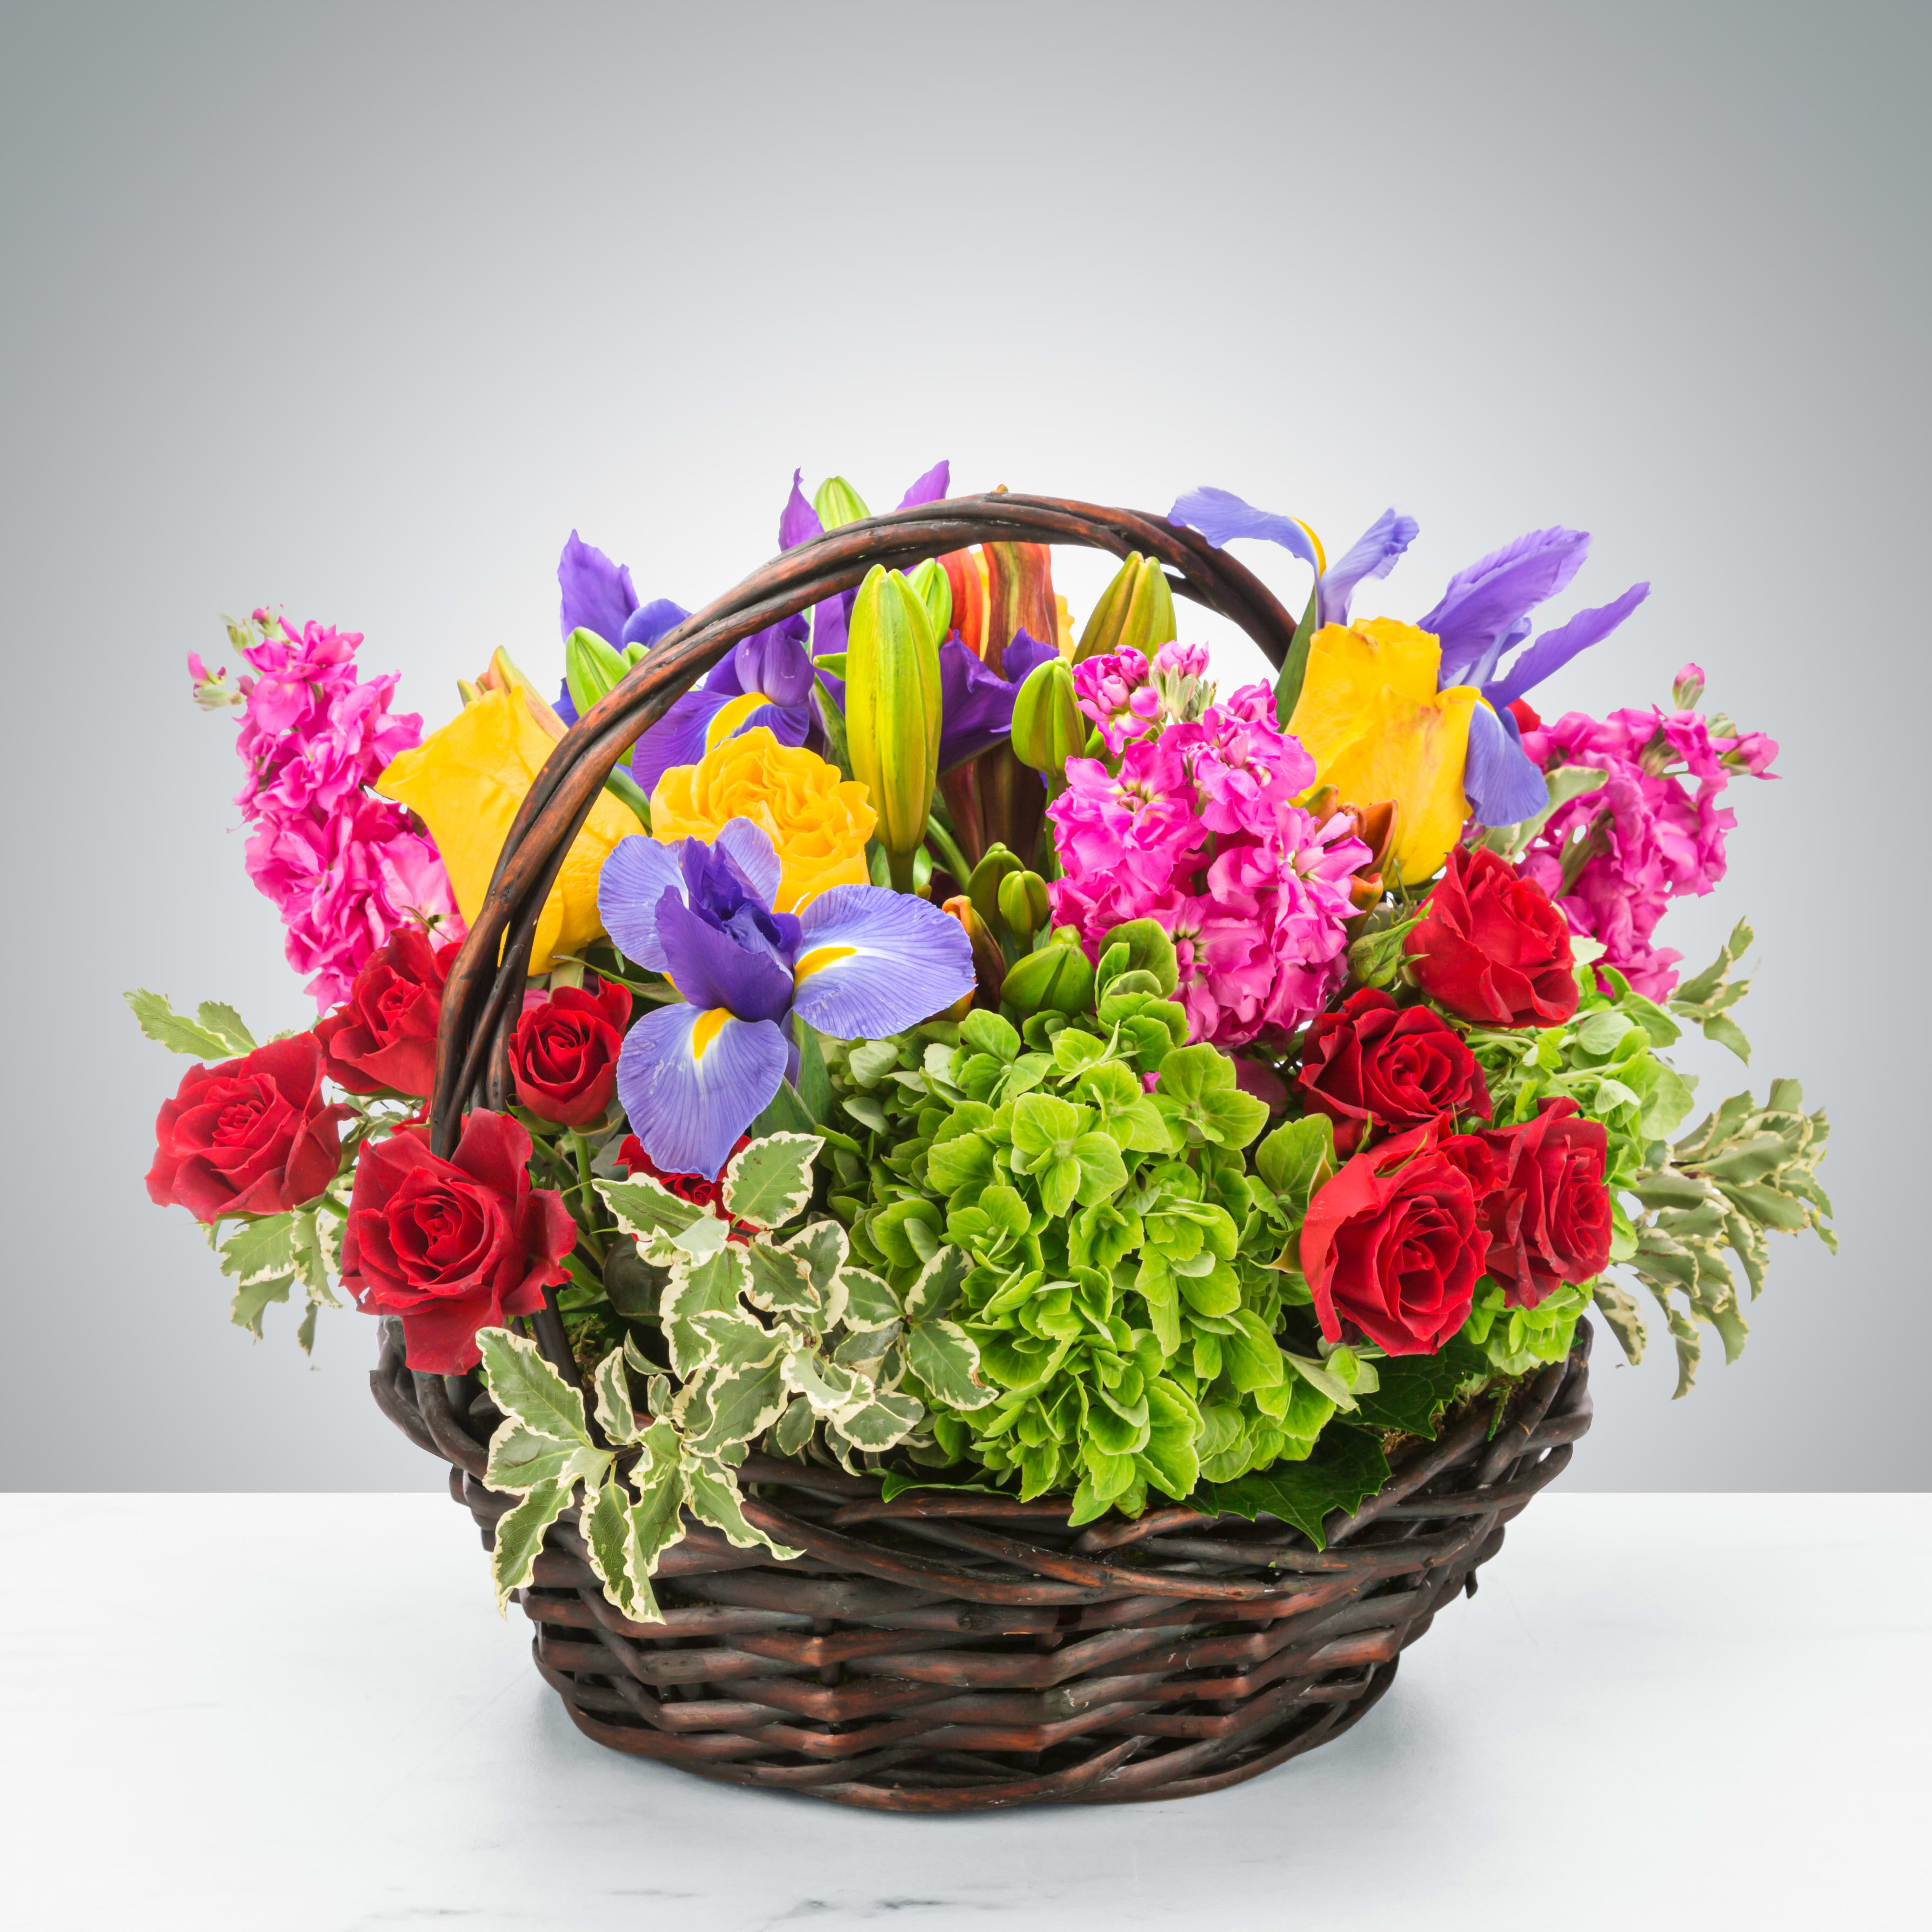 Brilliance.  BN™ - For the color lover in your life! Featuring 6 different types of flowers, this arrangement is a bright beauty. Send it to celebrate the summer season or for birthdays.  